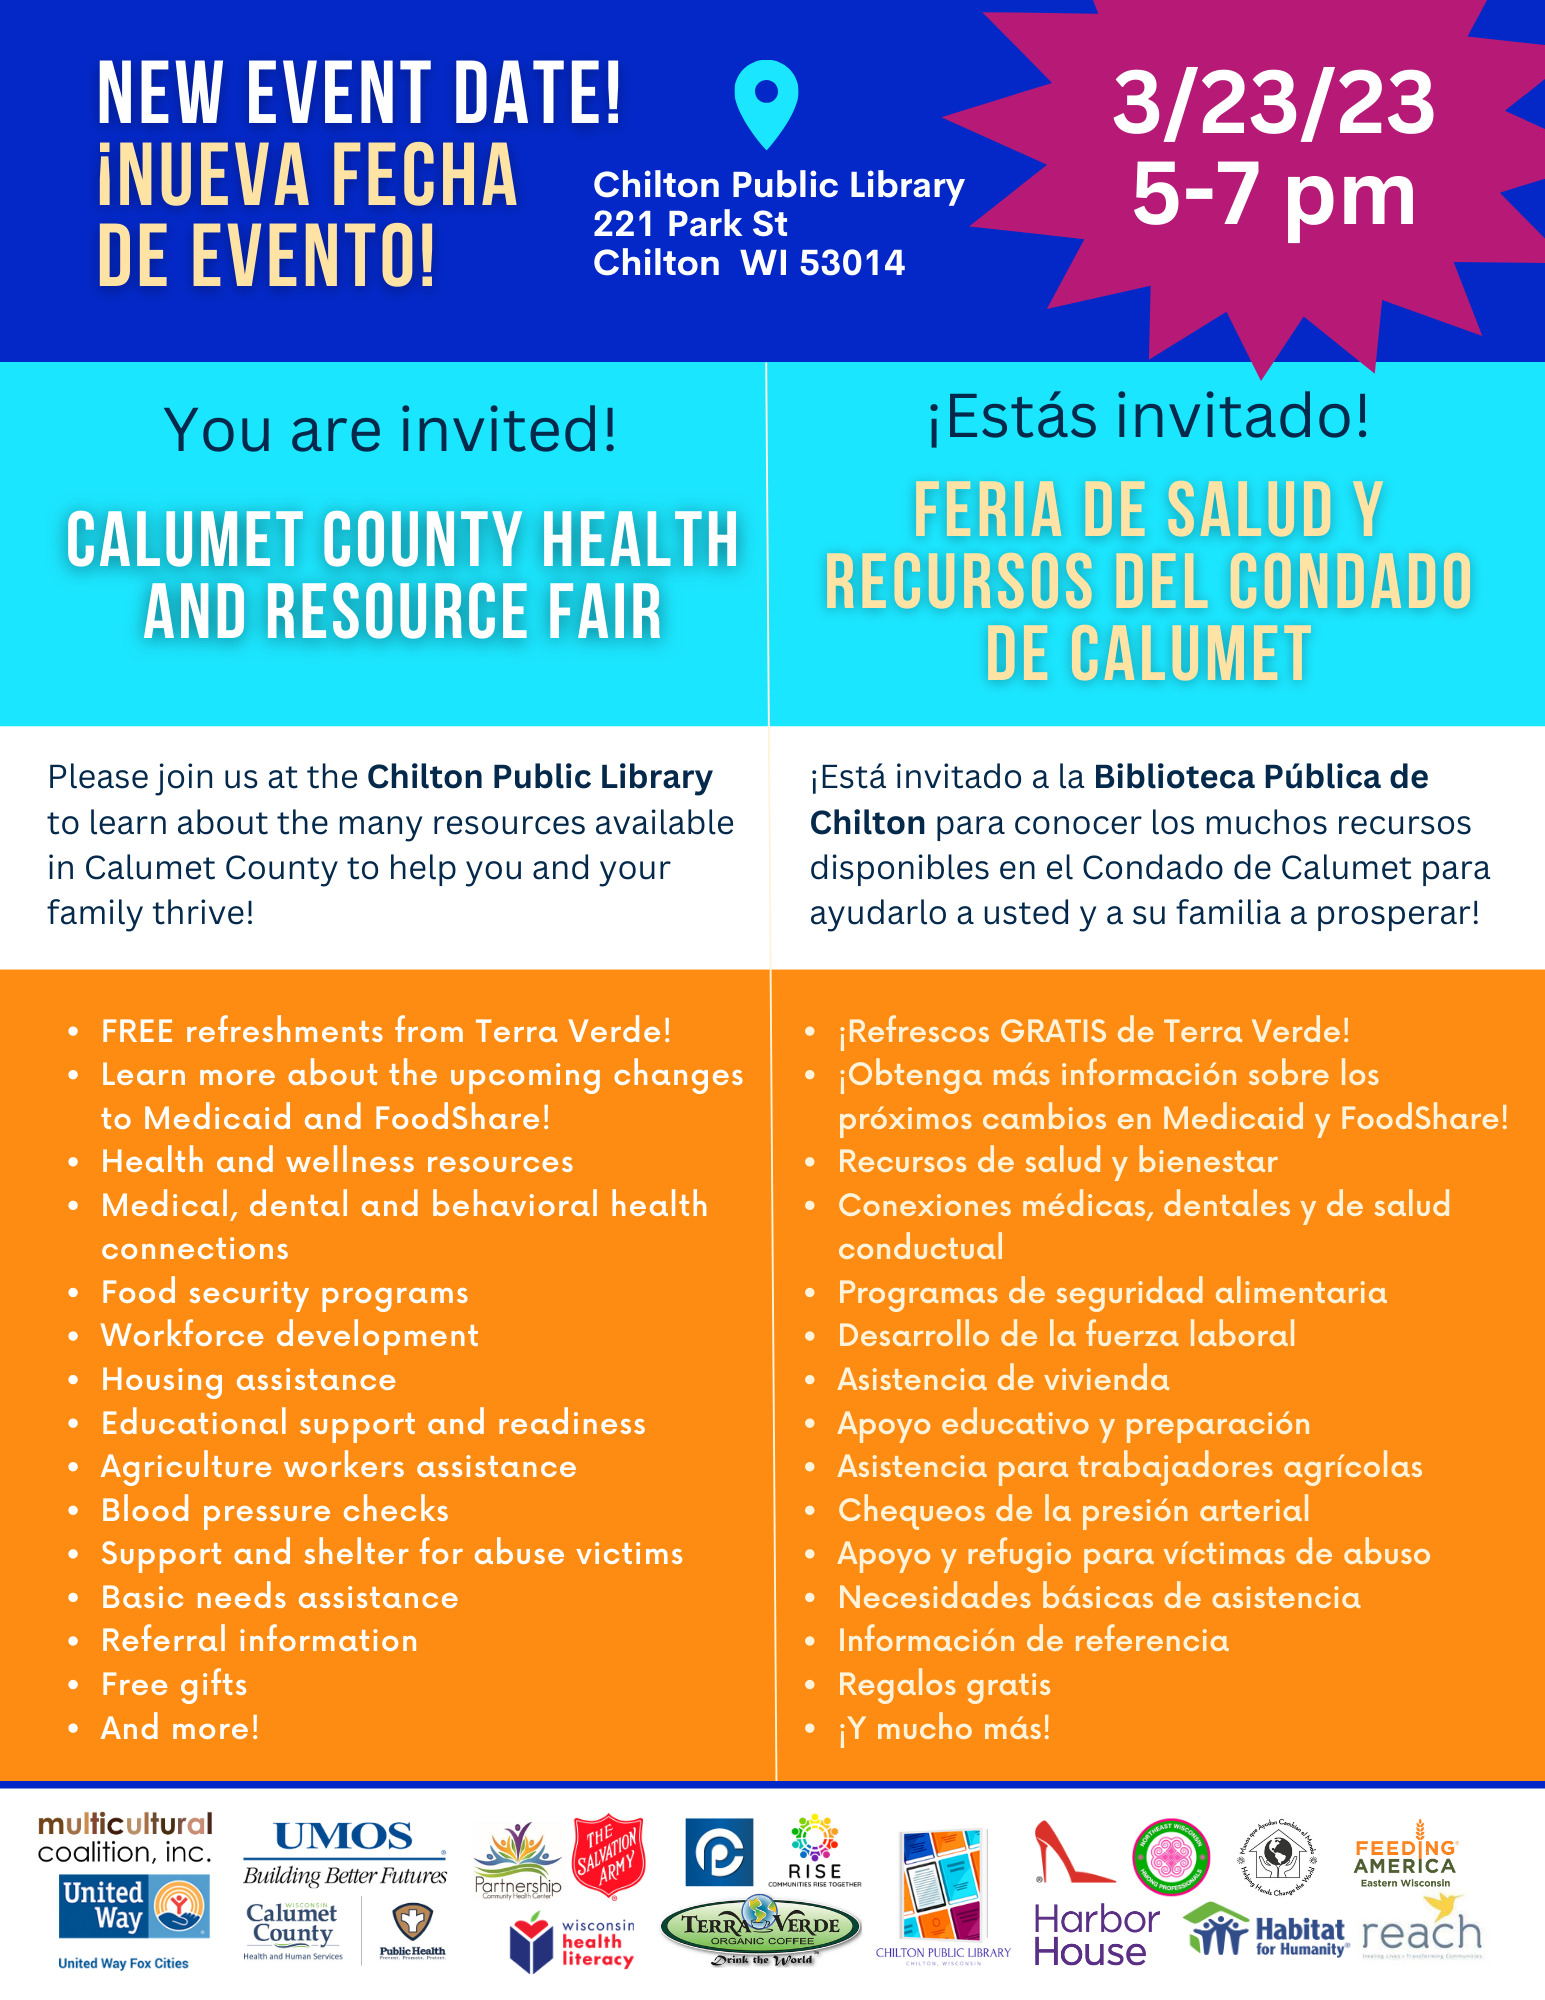 English and Spanish text on blue, orange, and white background to promote a clinic event for COVID-19 boosters